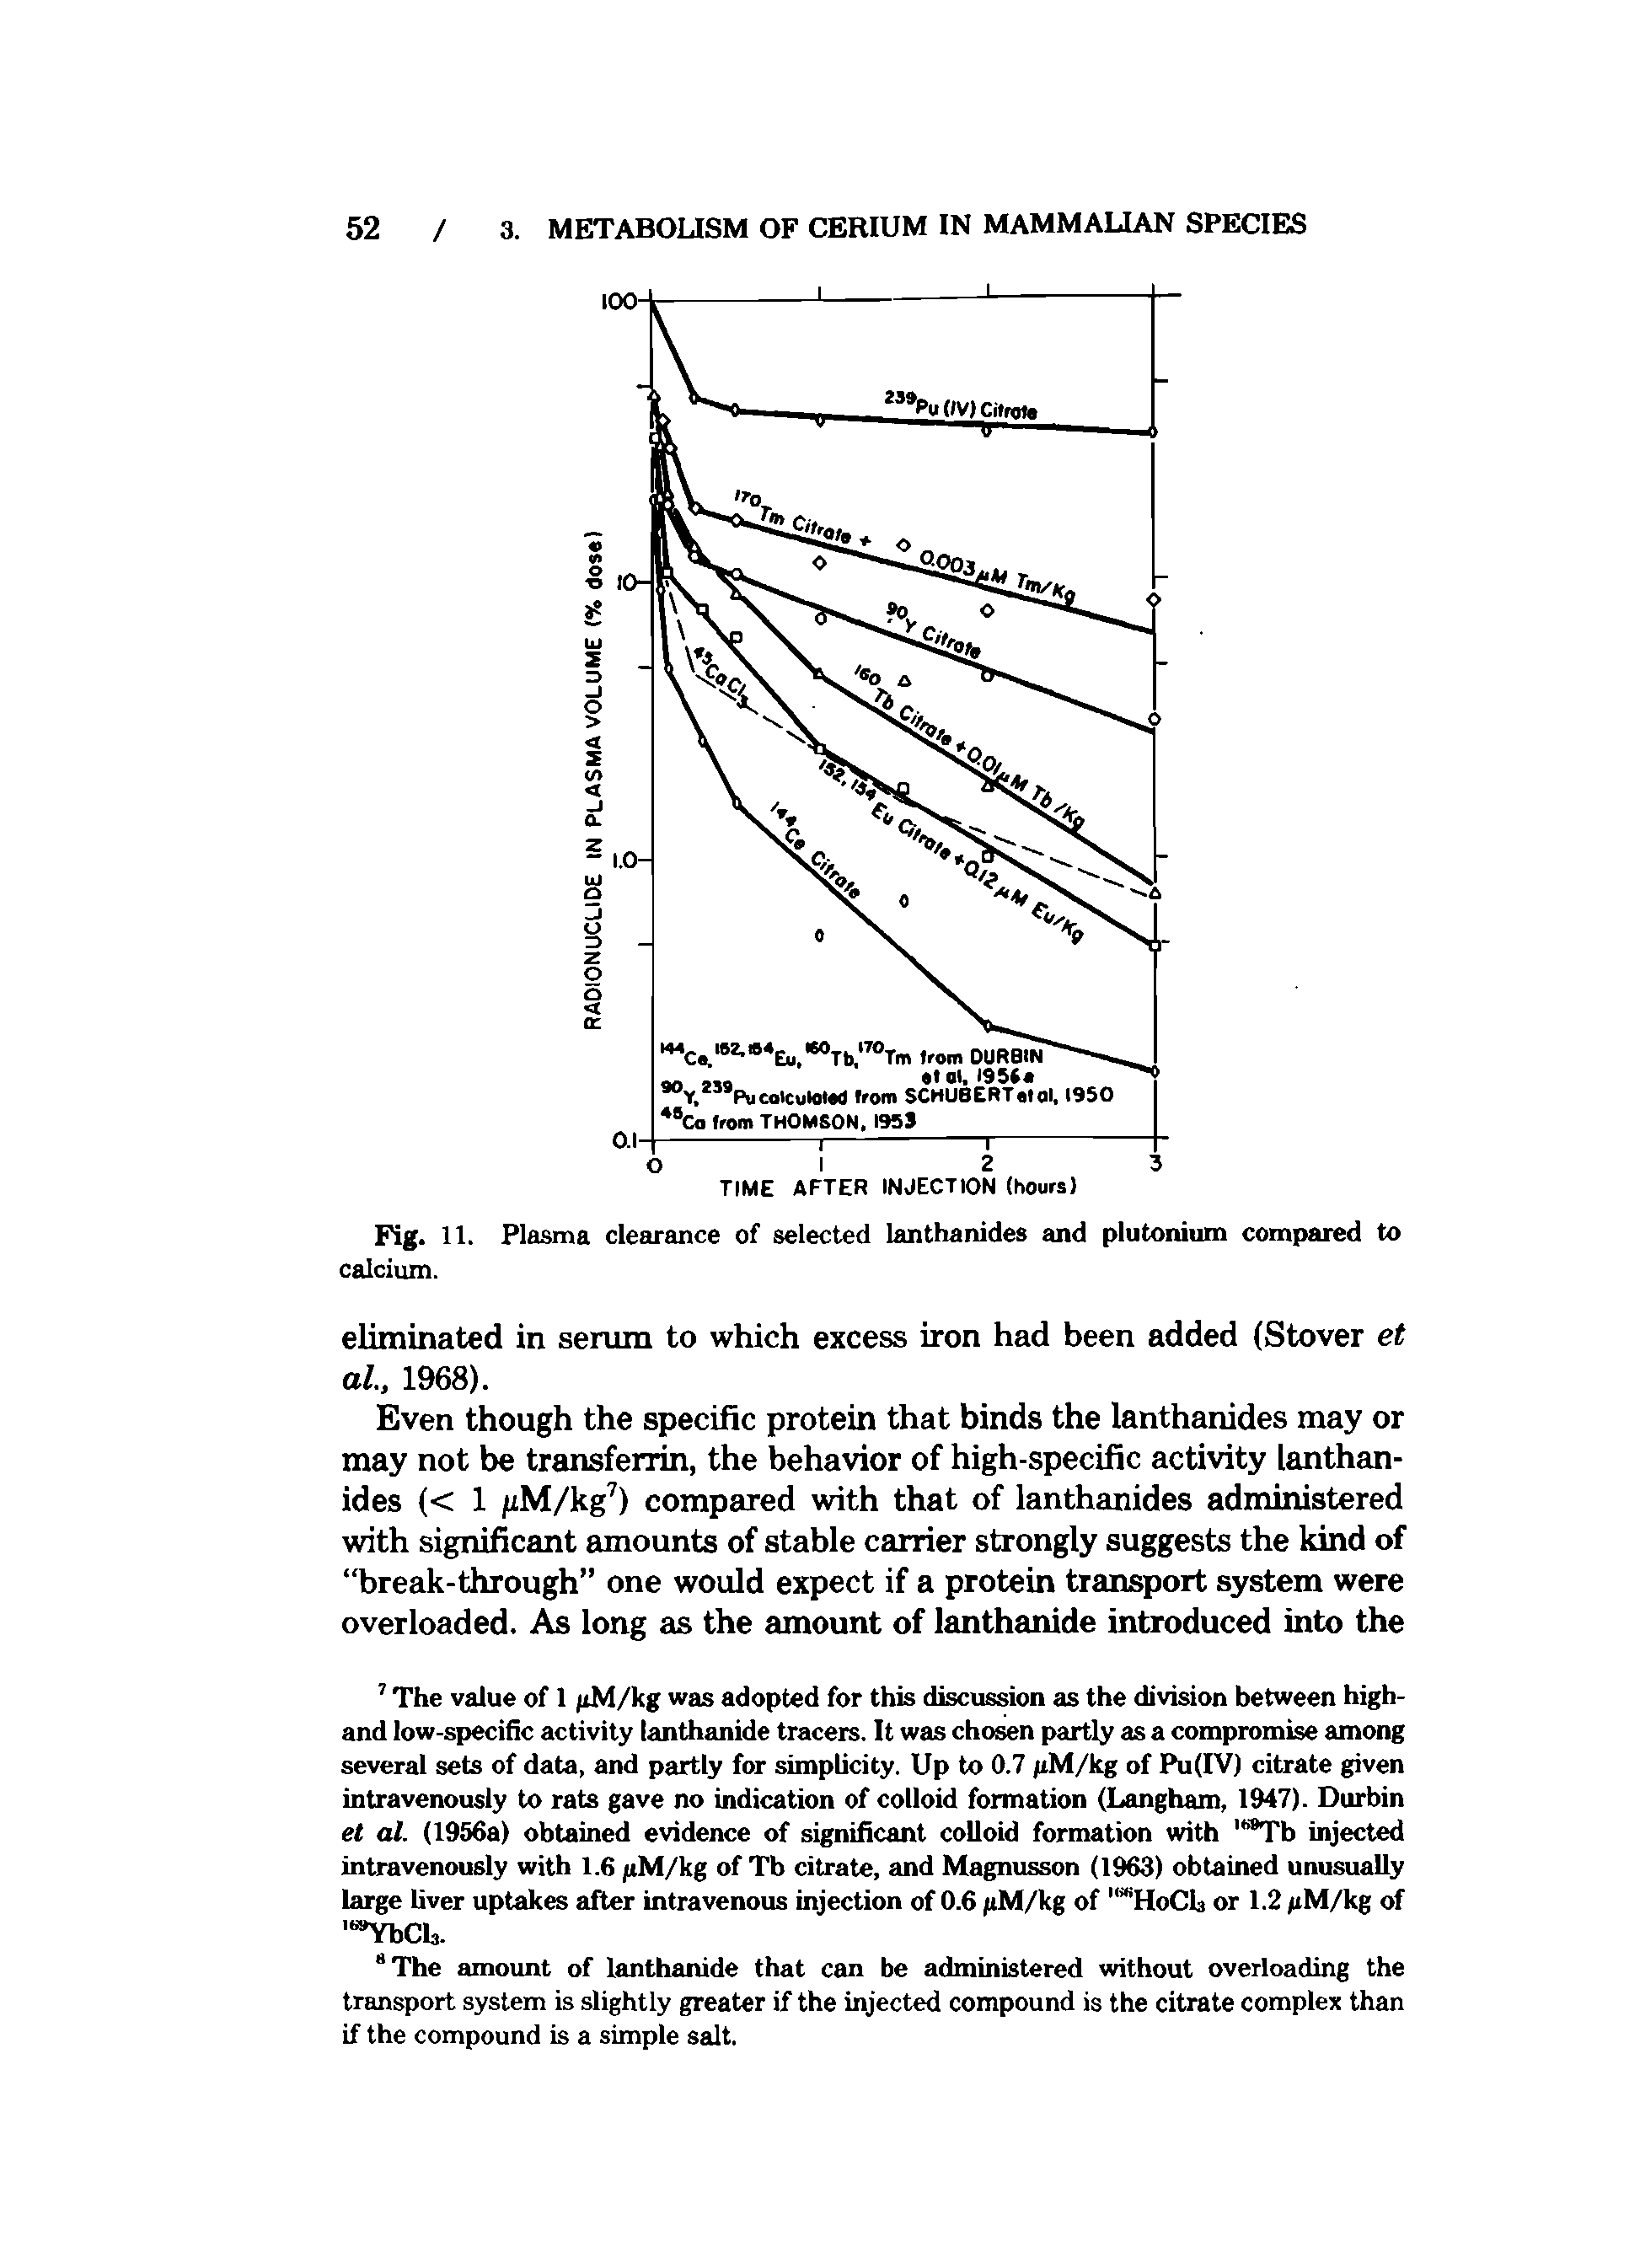 Fig. 11. Plasma clearance of selected lanthanides and plutonium compared to calcium.